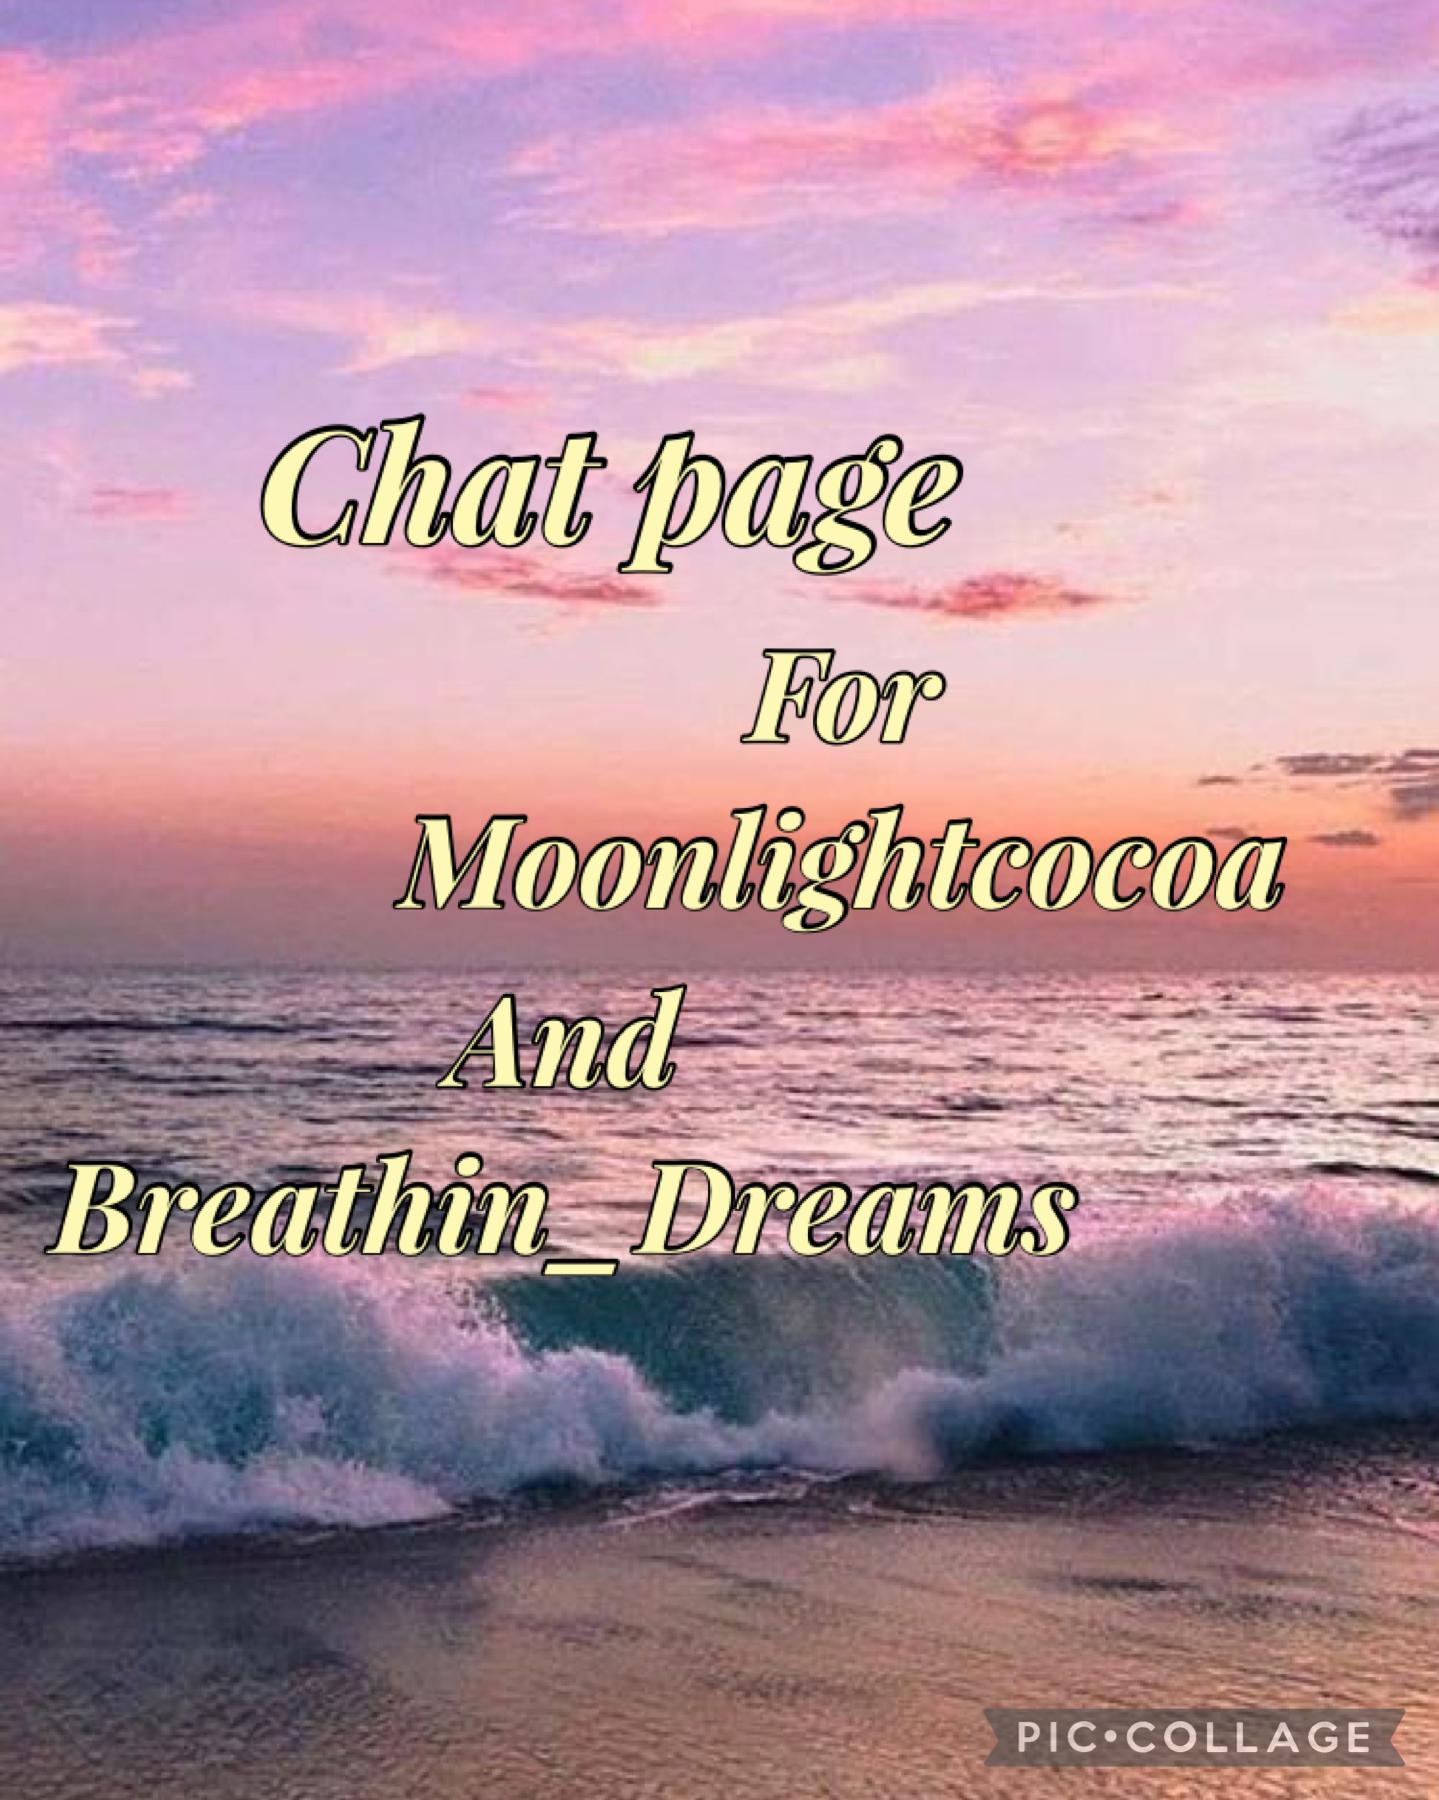 16.1.22 Chat page with moonlightcocoa